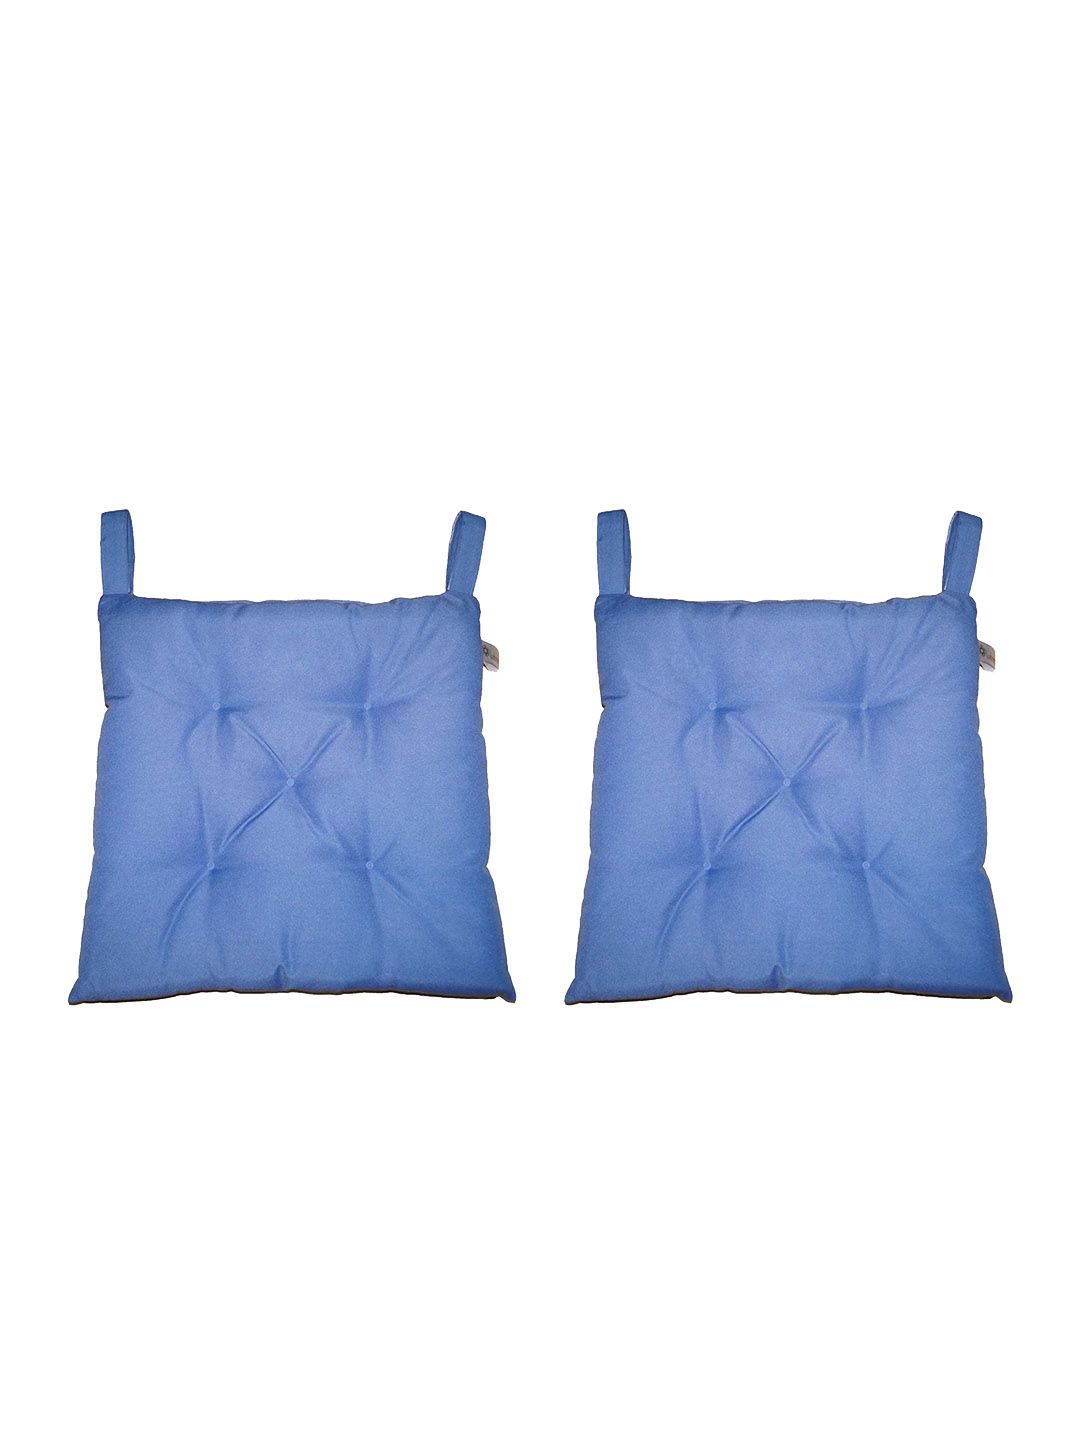 Lushomes Set of 2 Blue Water Resistant Chair Pads Price in India